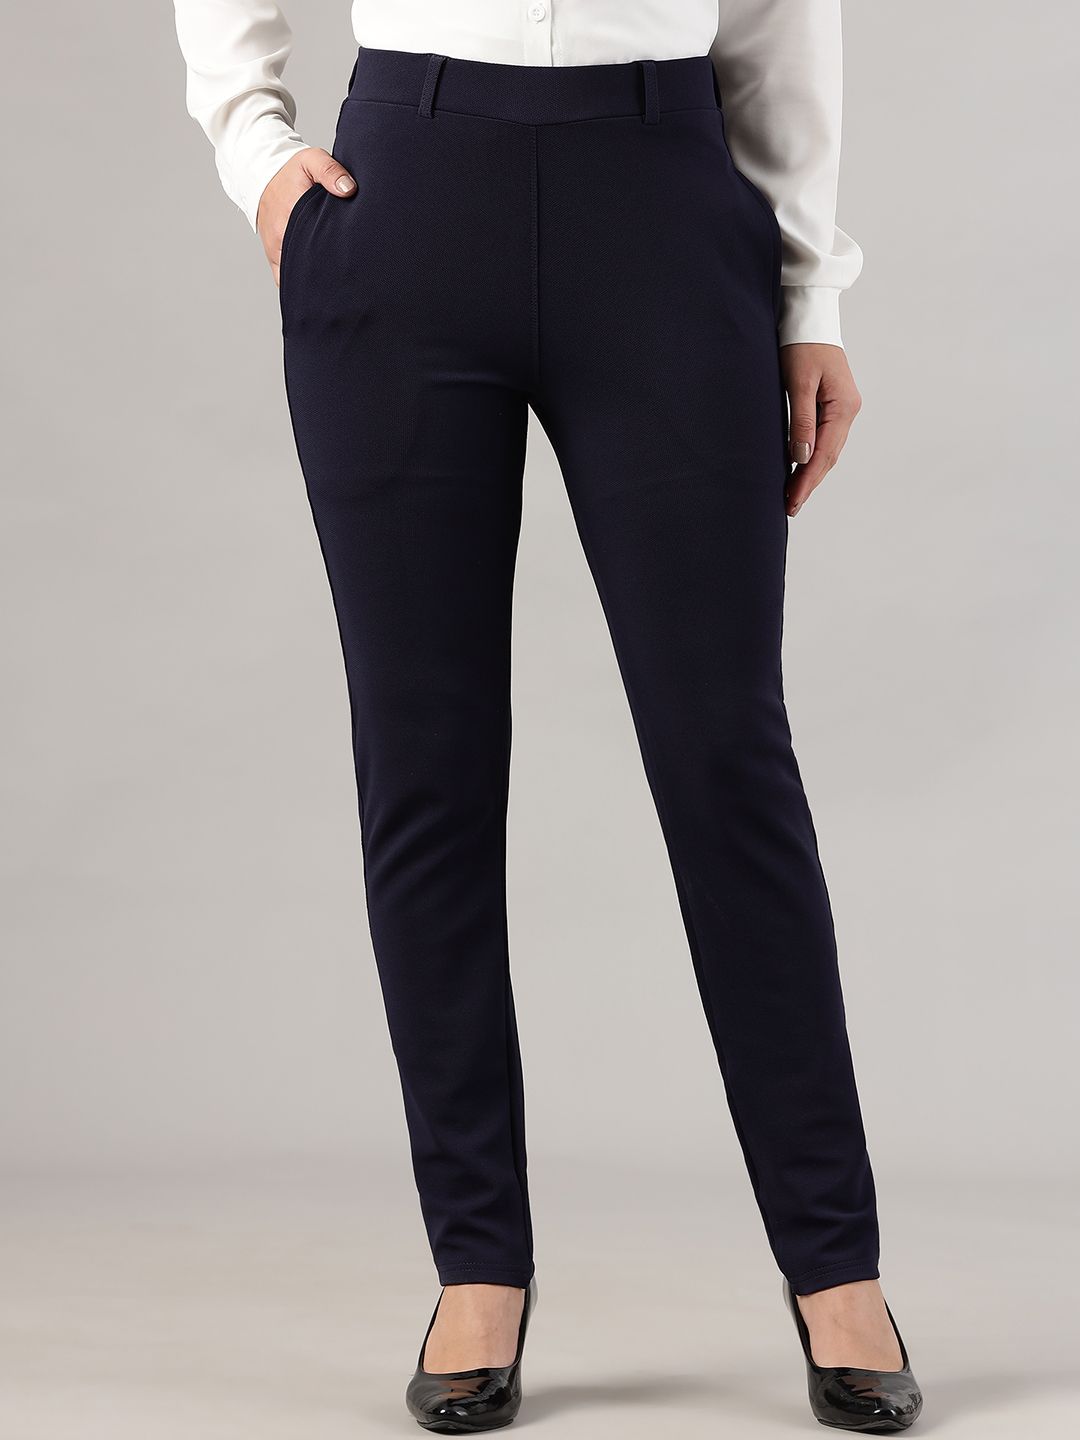 FITHUB Women Slim Fit High-Rise Cotton Formal Trousers Price in India